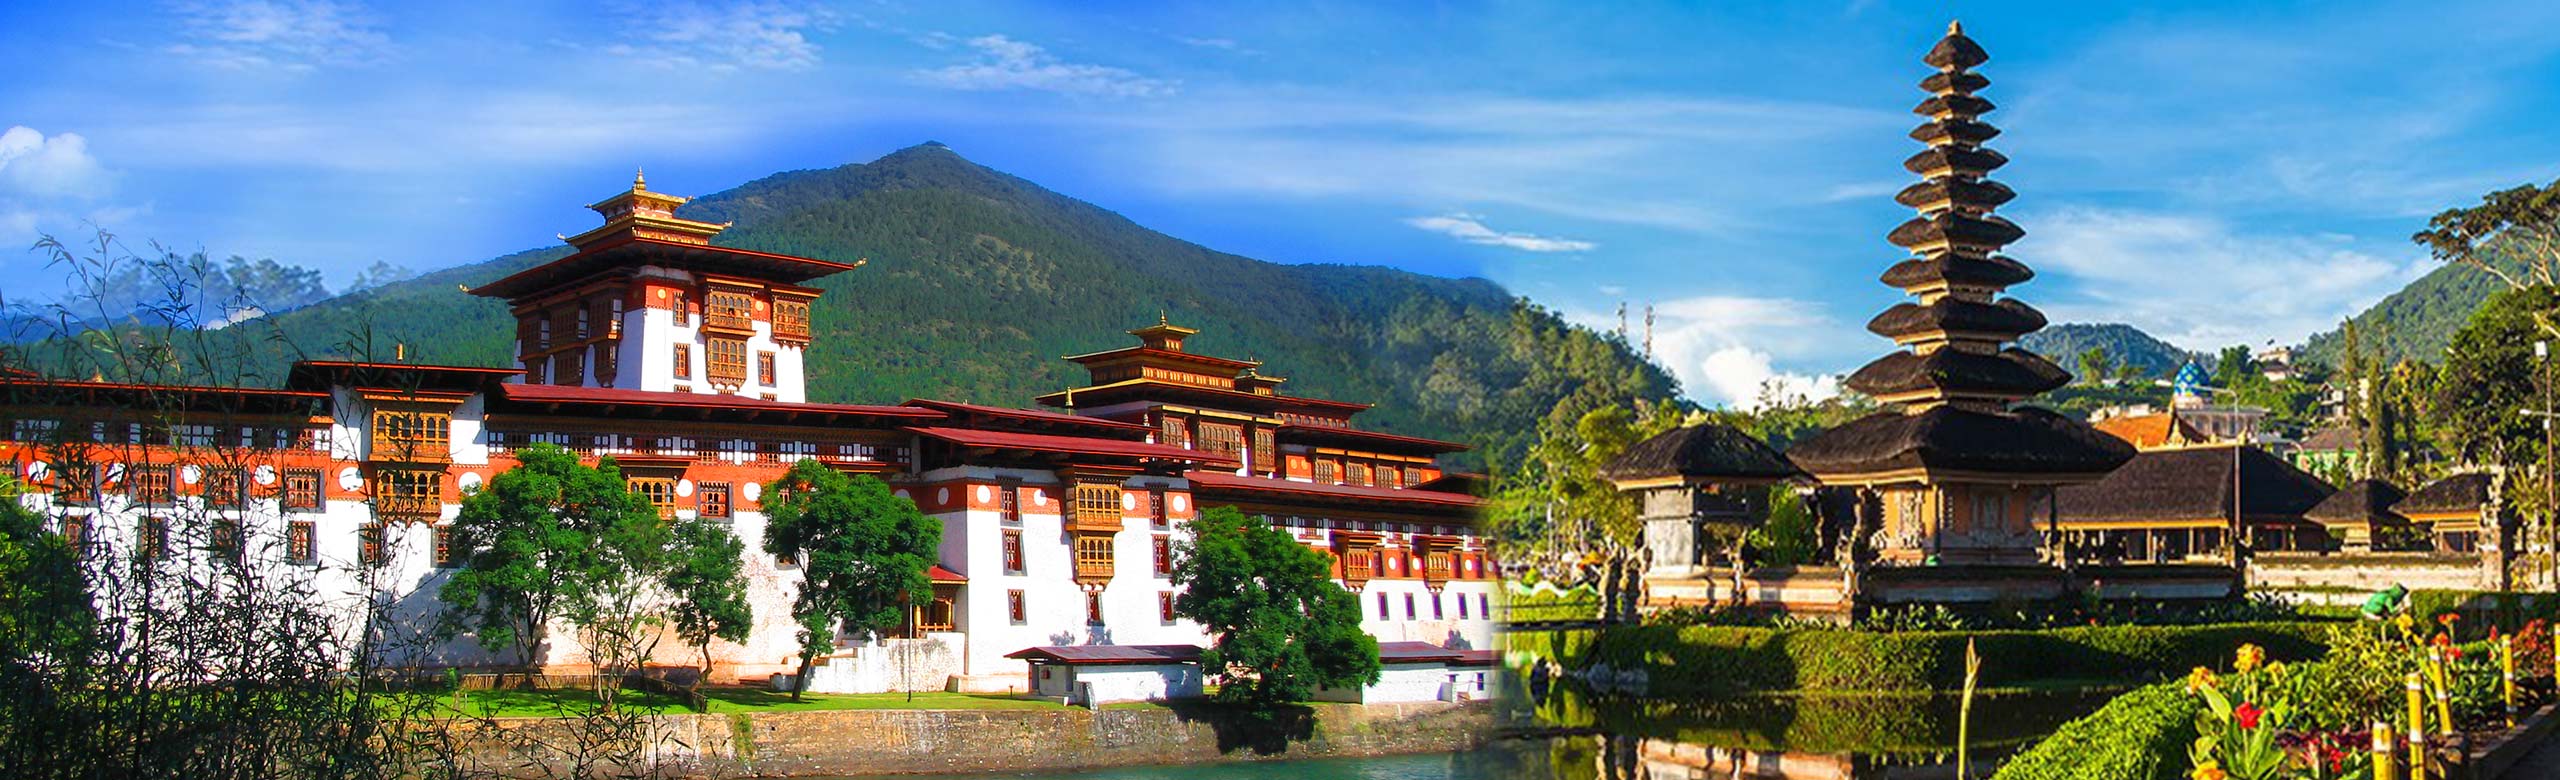 How to Get to Bhutan from Indonesia